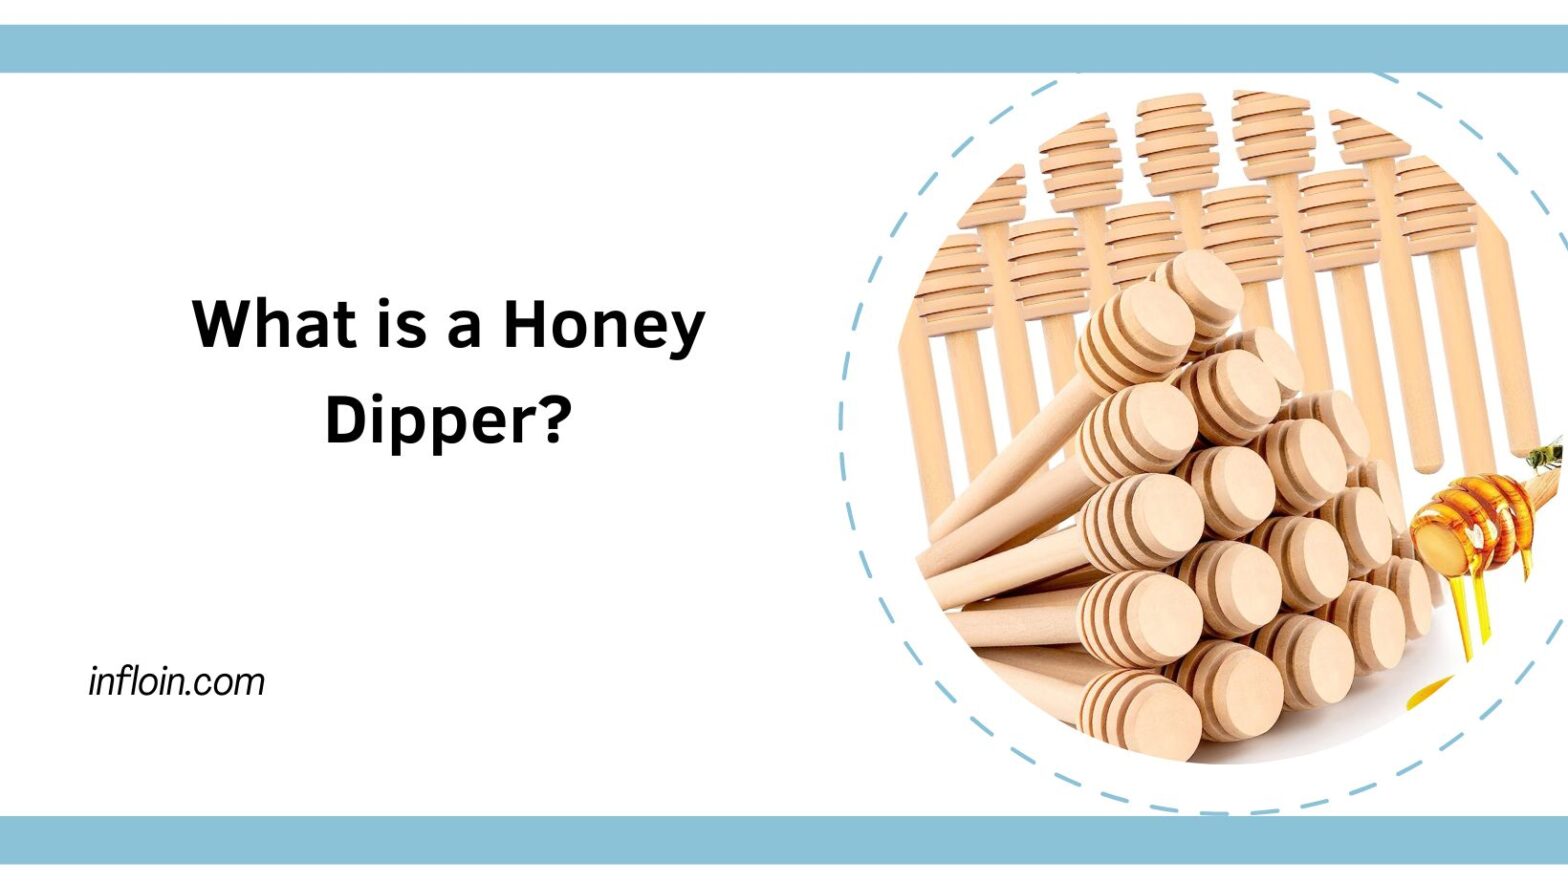 What is a Honey Dipper